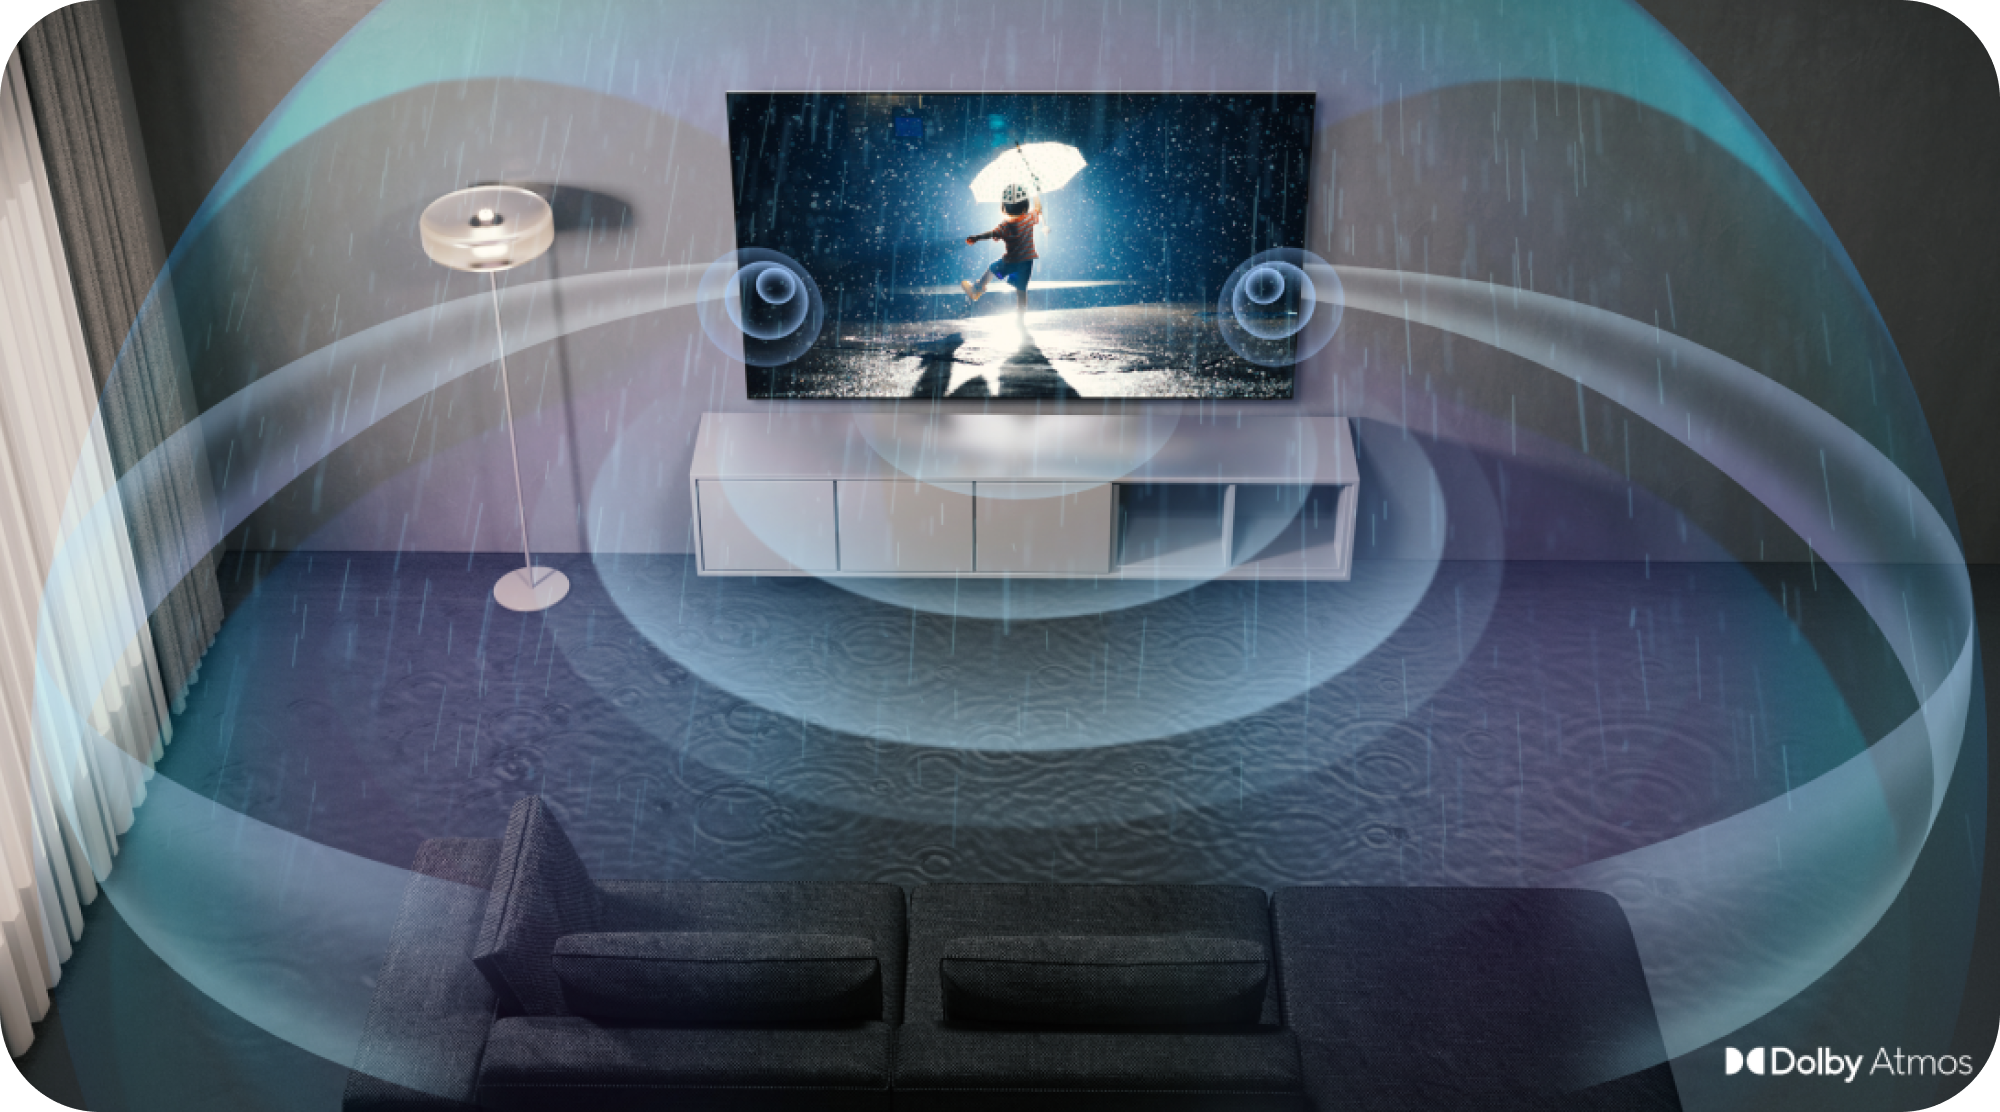 Samsung TV with Dolby Atmos and sound waves around the room